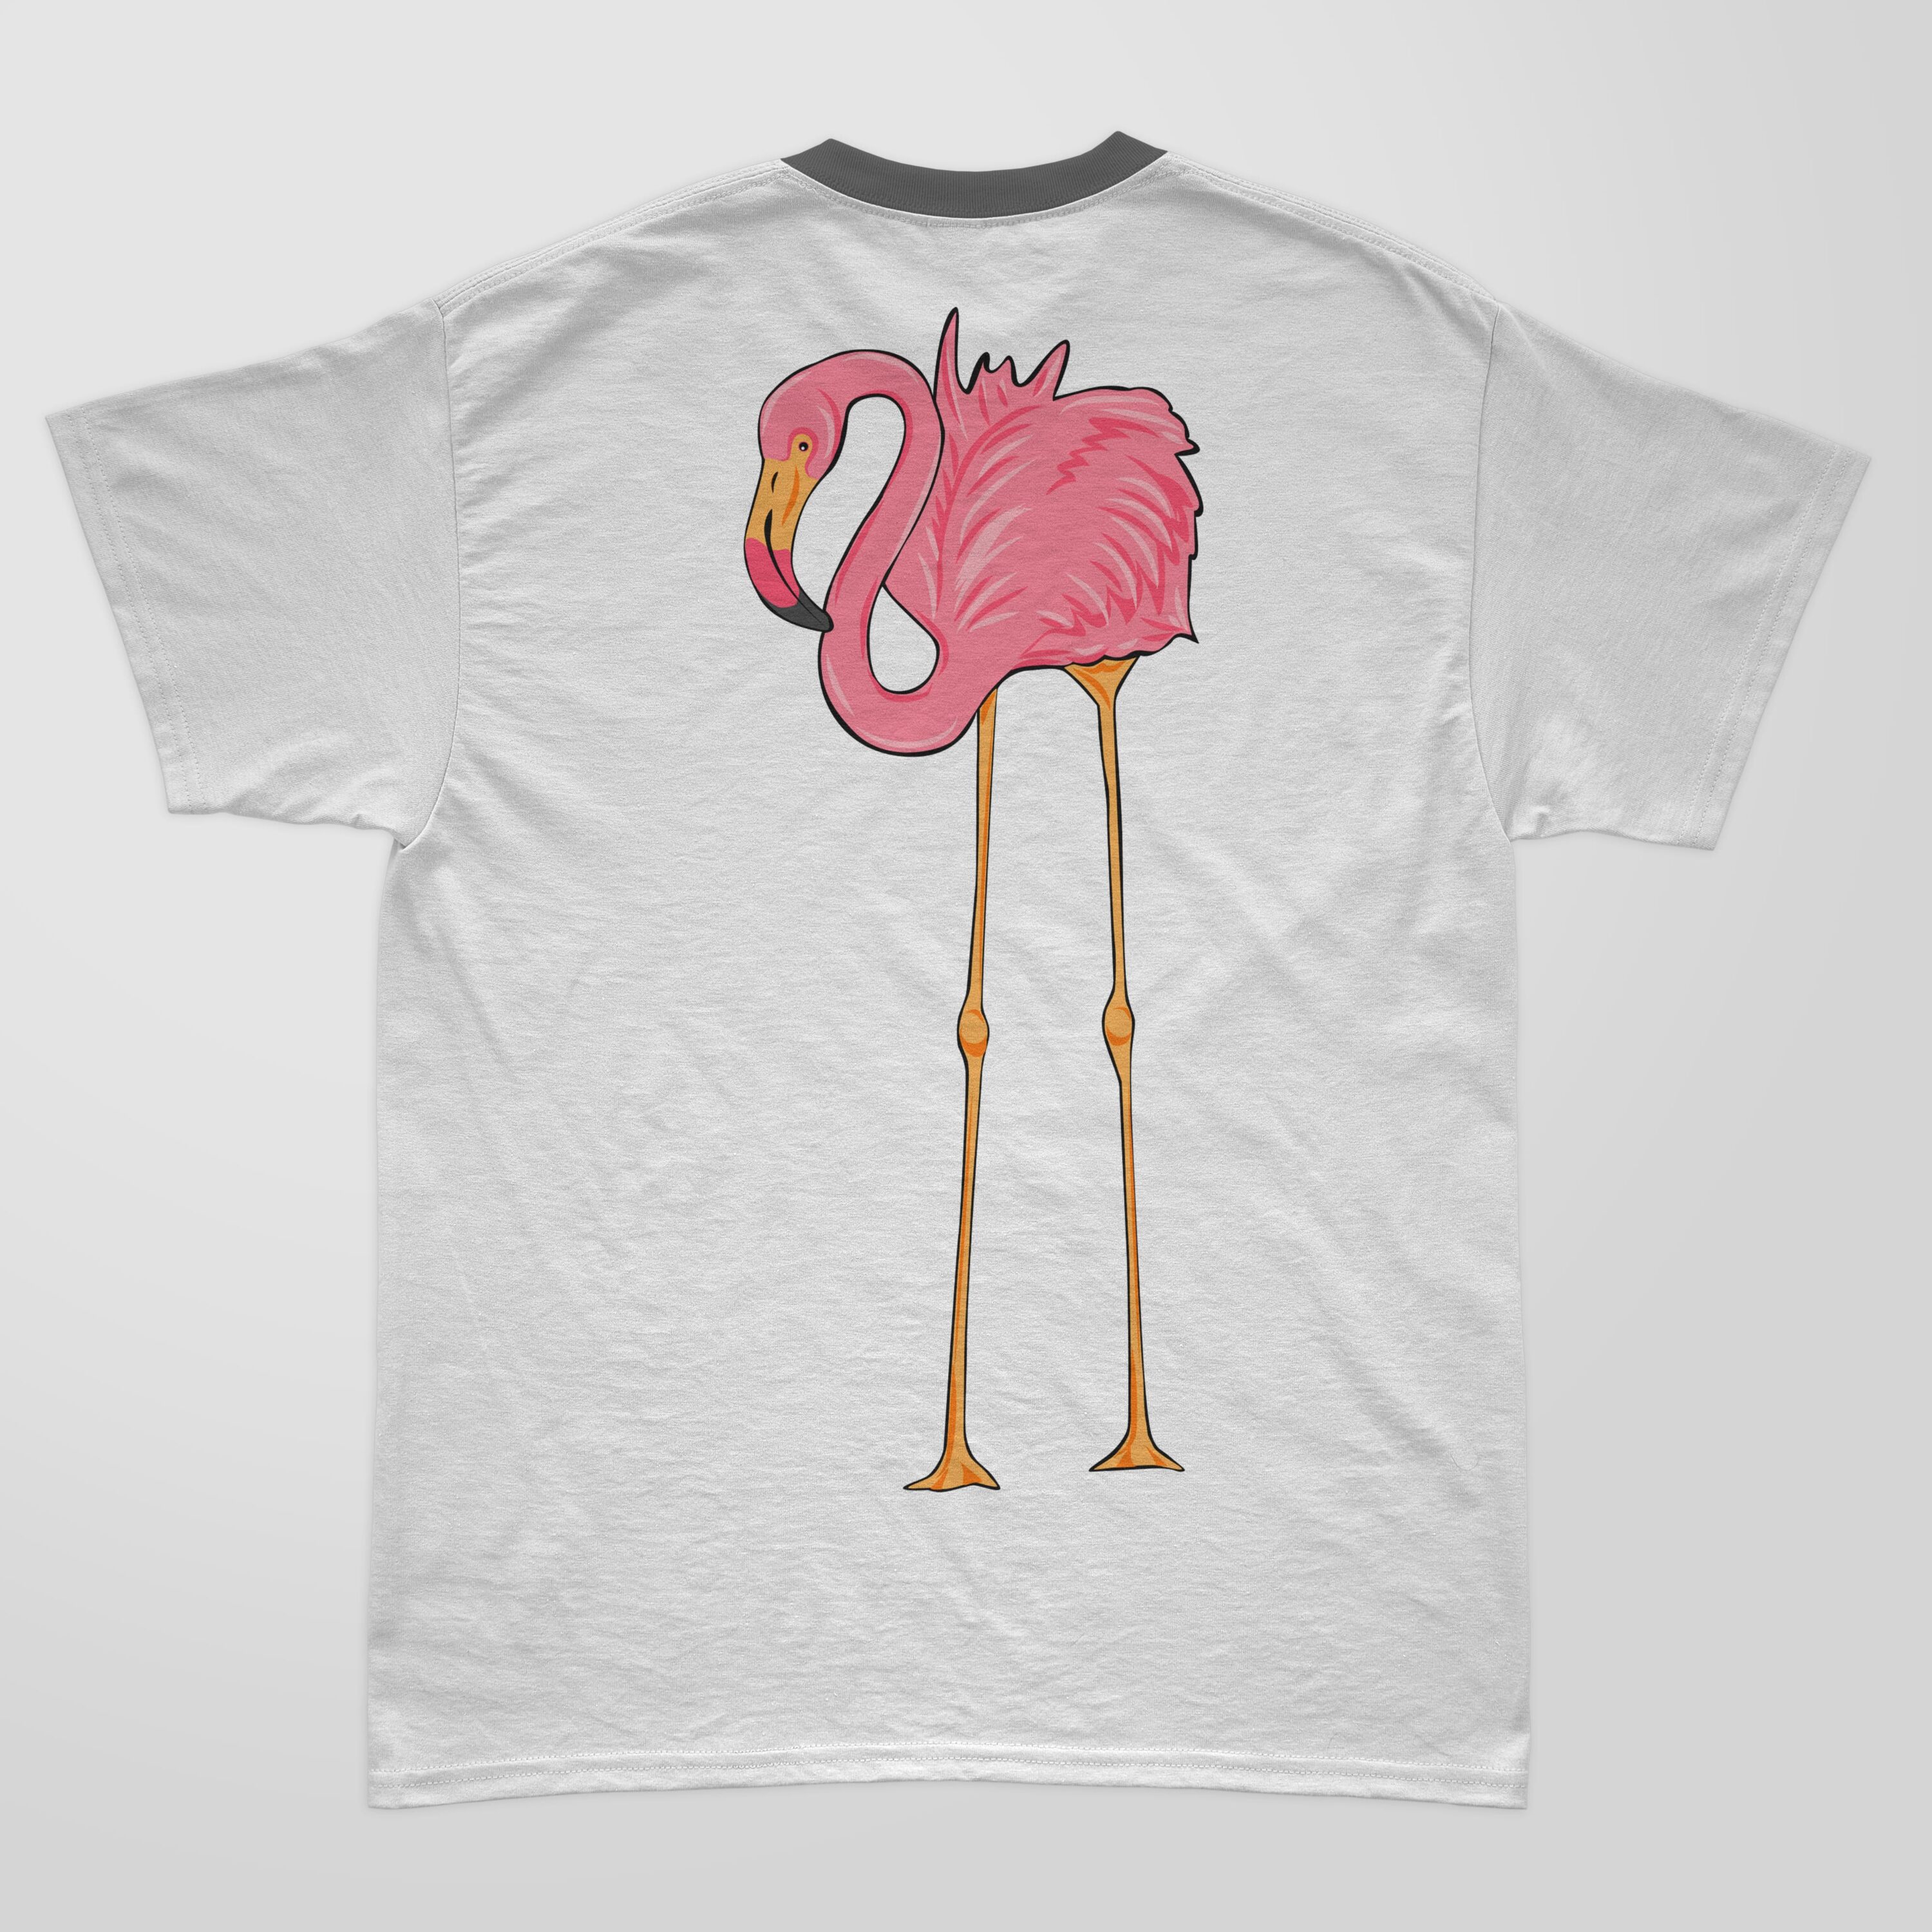 Cute pink flamingo on the white t-shirt.